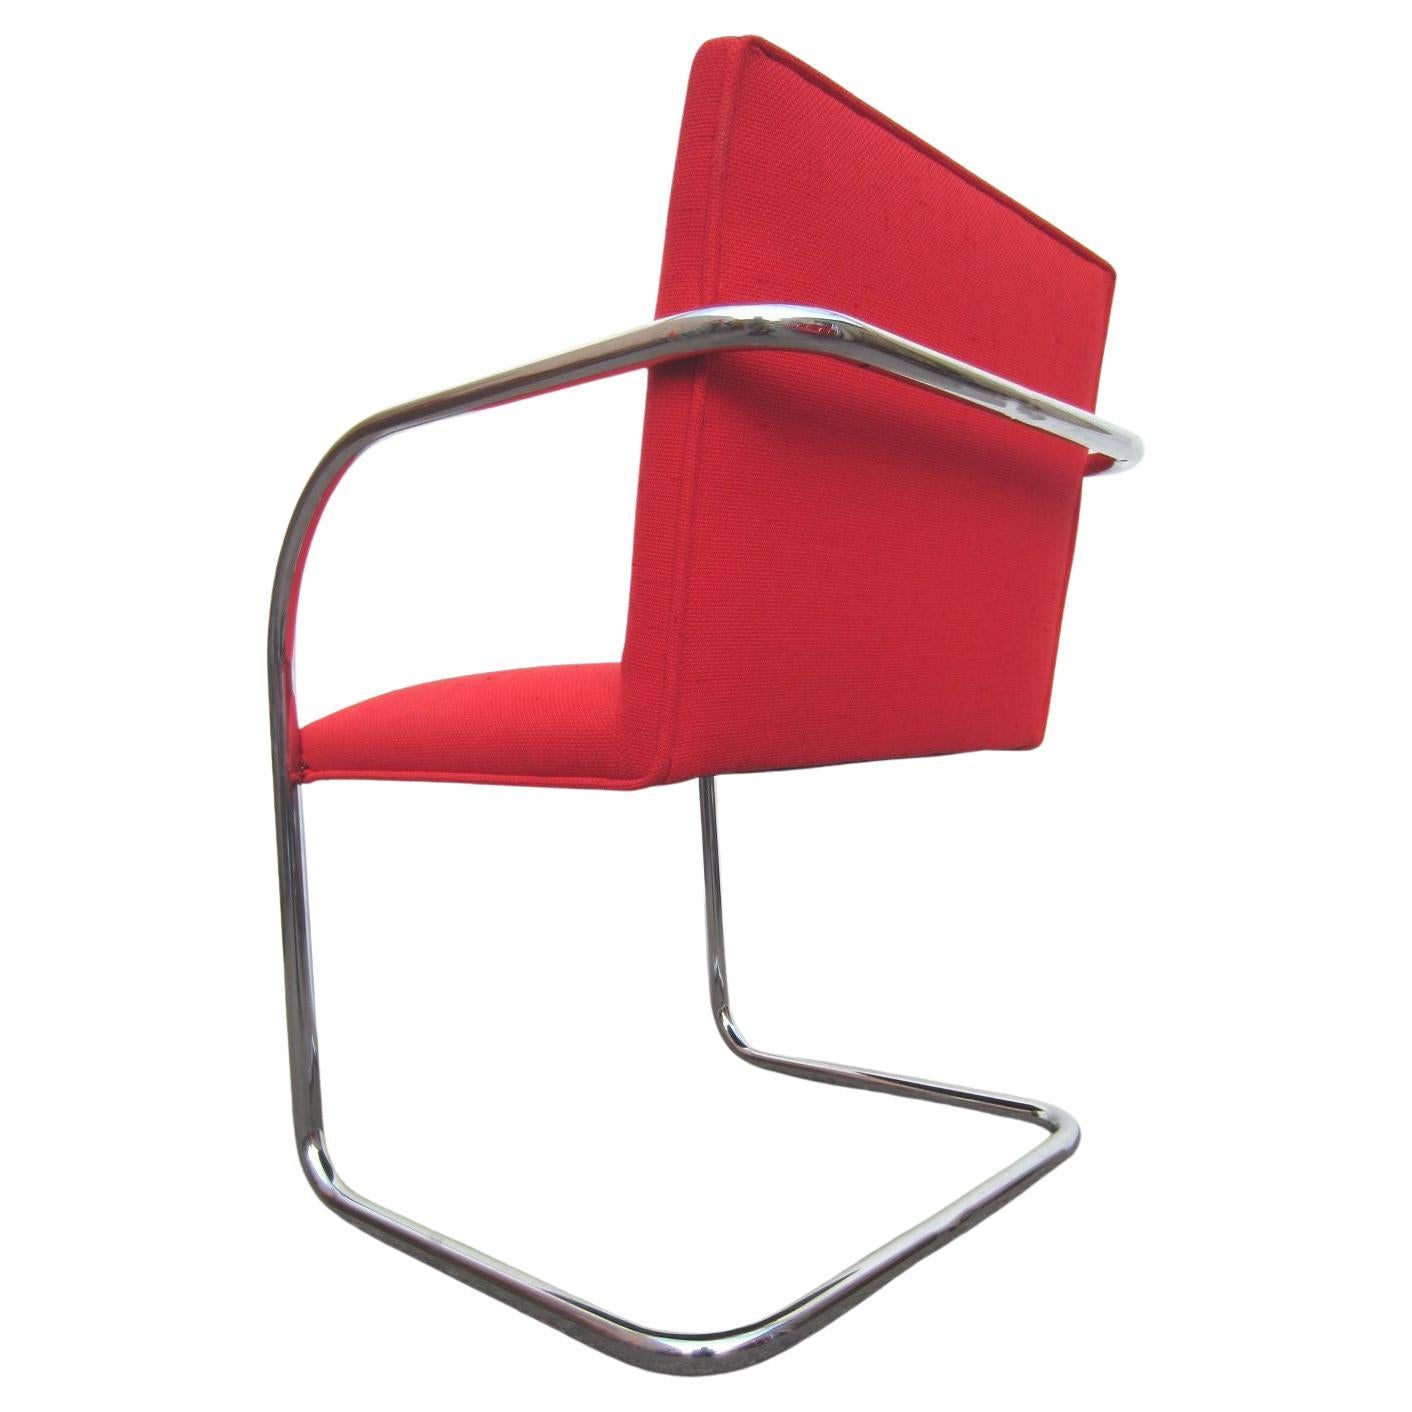 American set of 10 Vintage Brno Chairs designed by Mies Van Der Rohe   For Sale